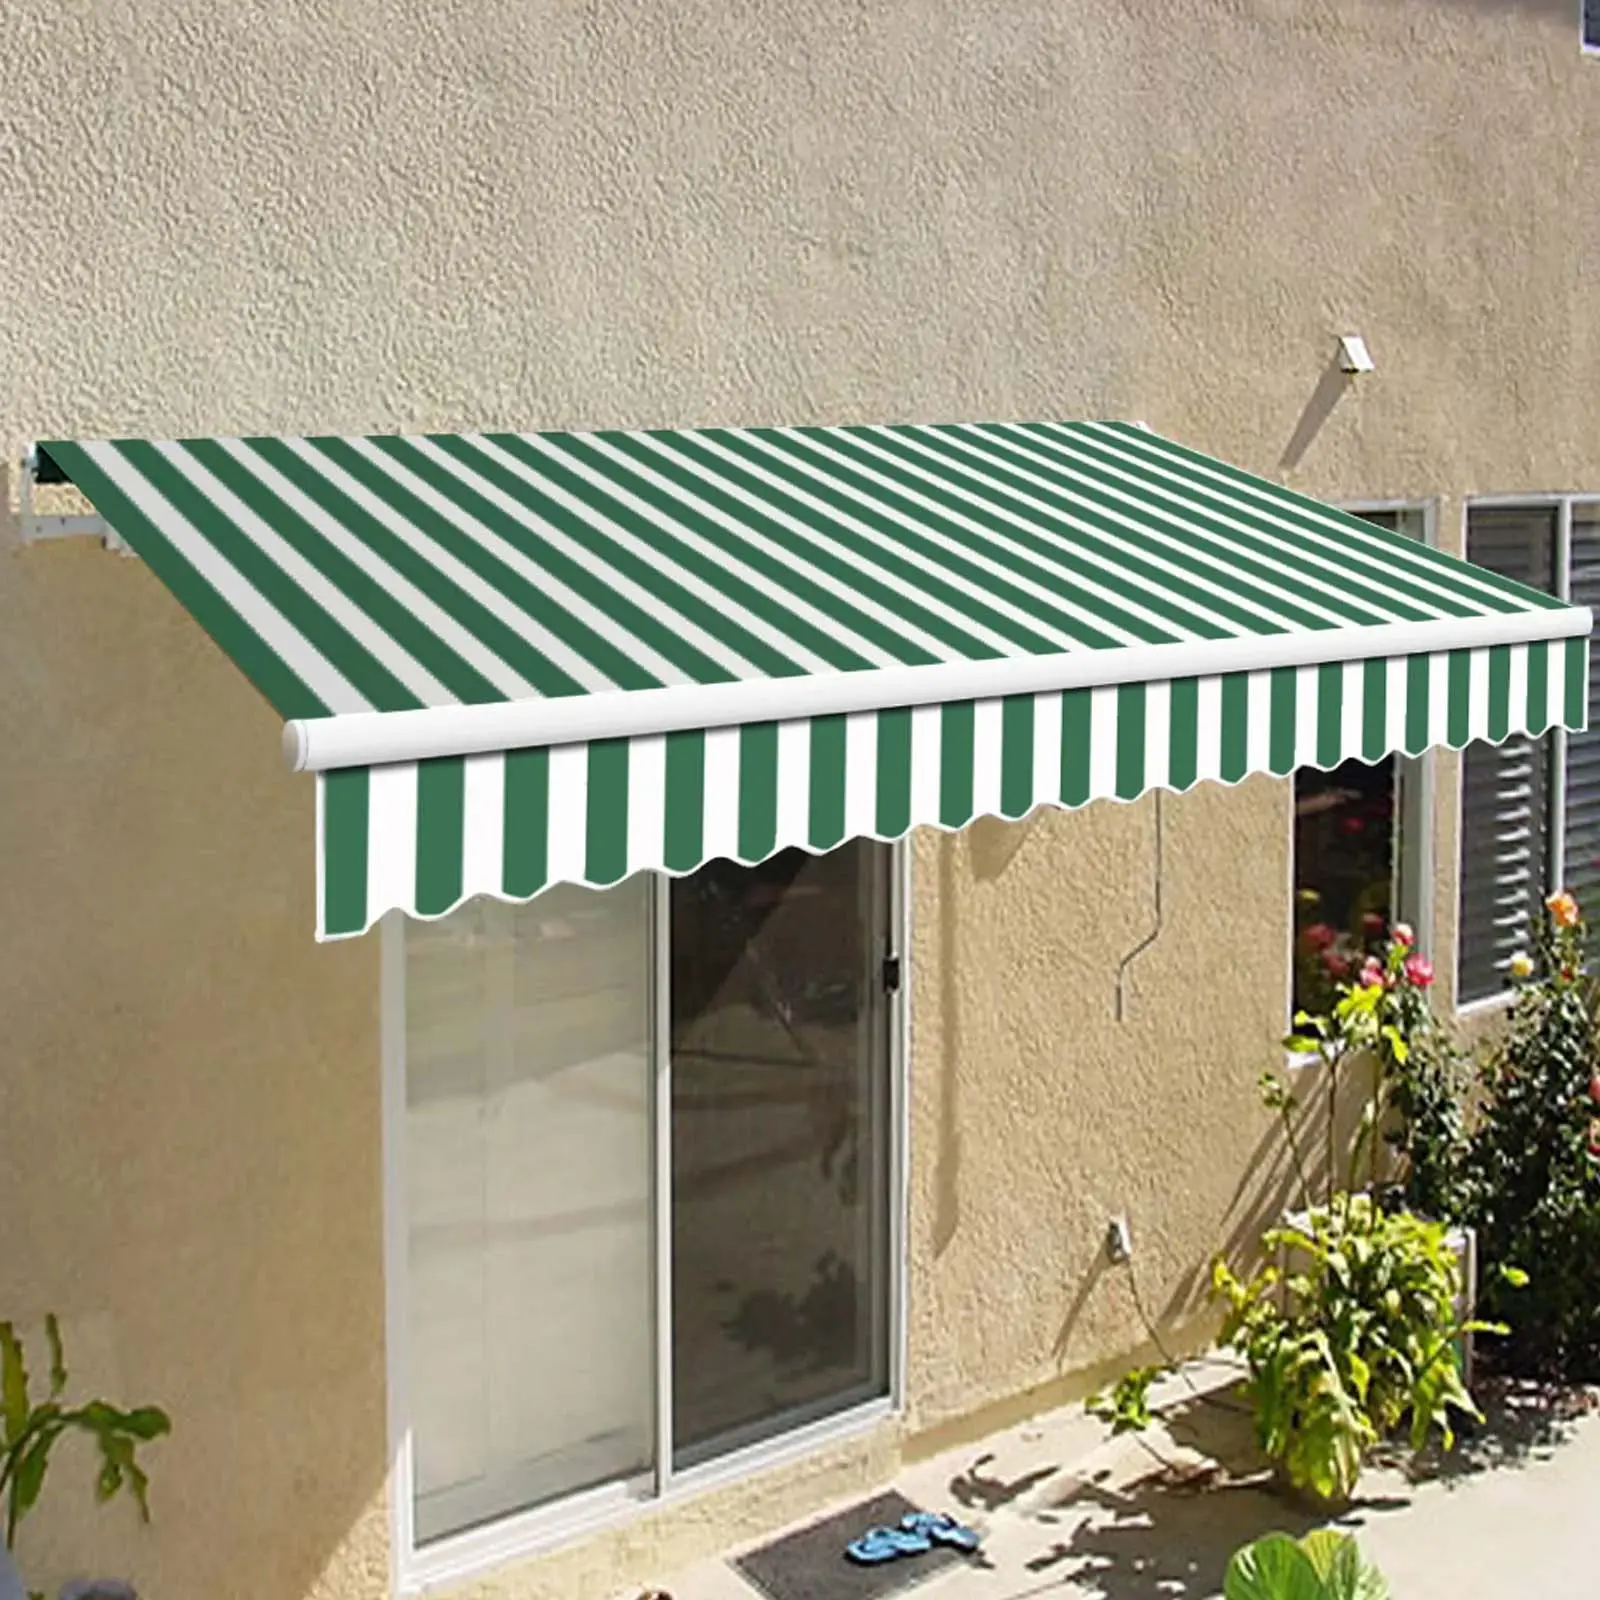 Manual Retractable Awning Awnings for Patio Outdoor Sun Shade Balcony Awning With Hand Crank Ideal for Any Window or Door